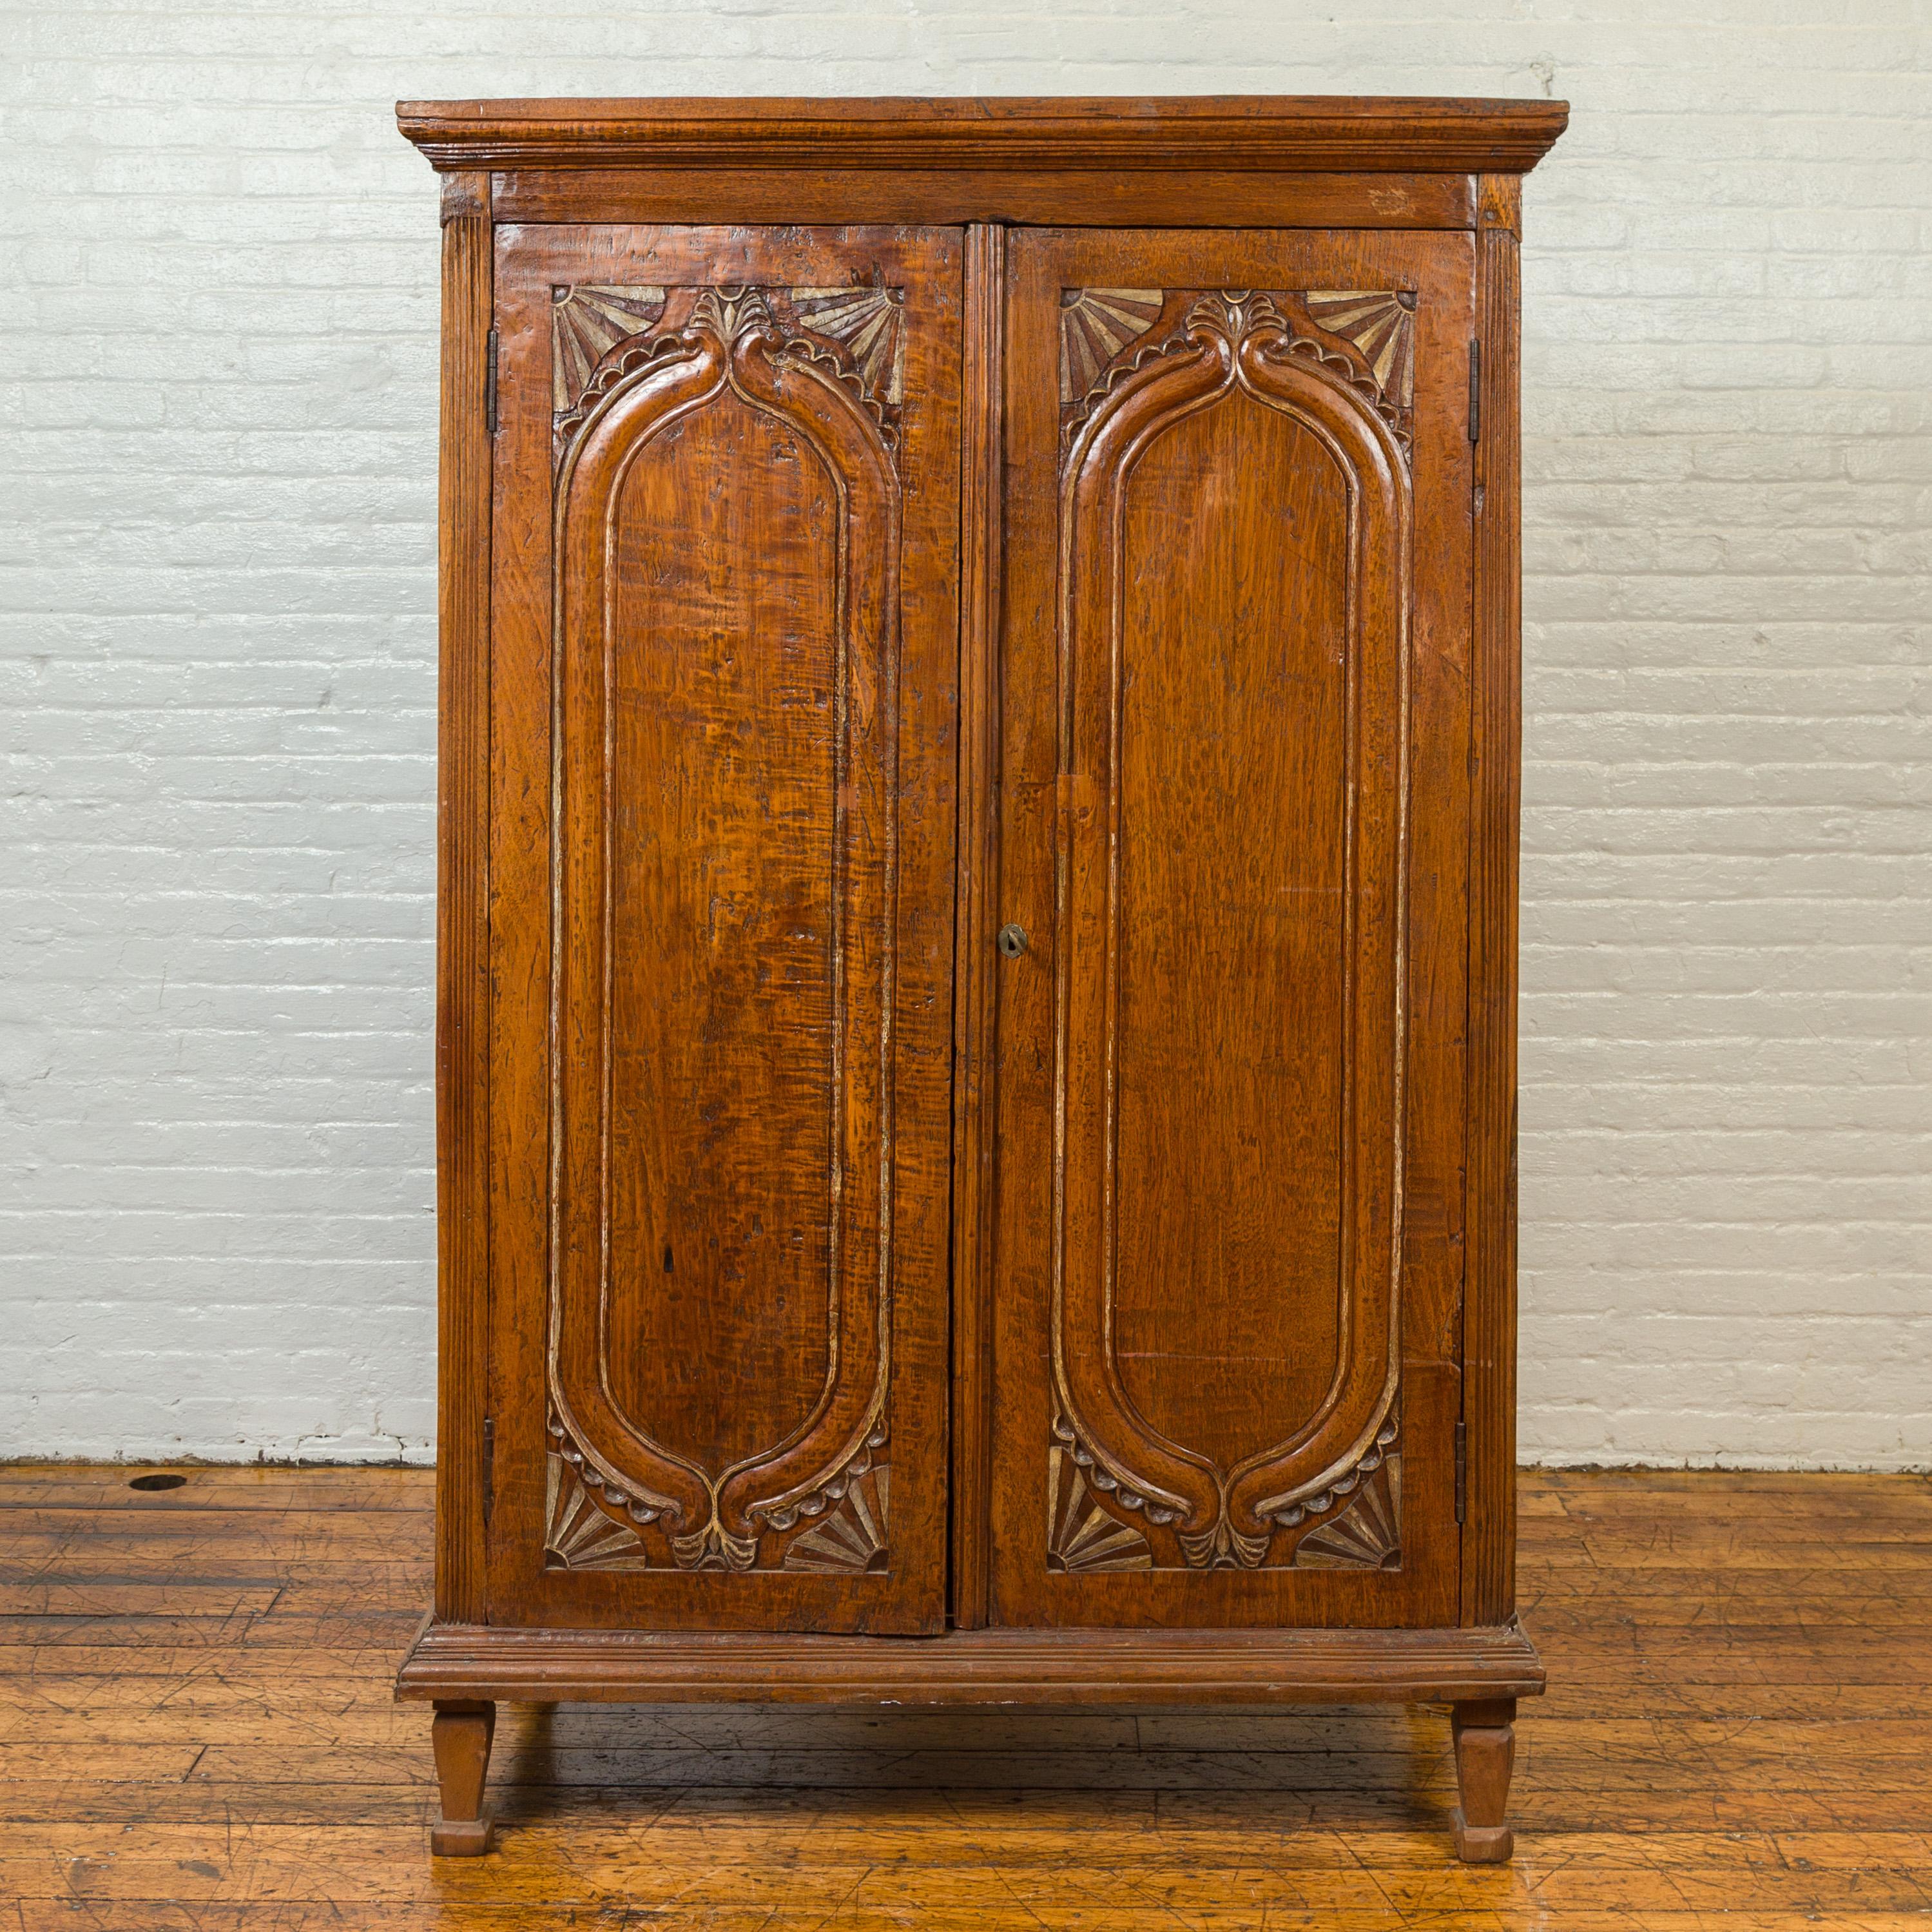 A Dutch Colonial period antique Indonesian teak wood cabinet from the late 19th century, with carved fan motifs. Crafted during the later years of the 19th century, this teak wood cabinet features a molded cornice overhanging two large doors,